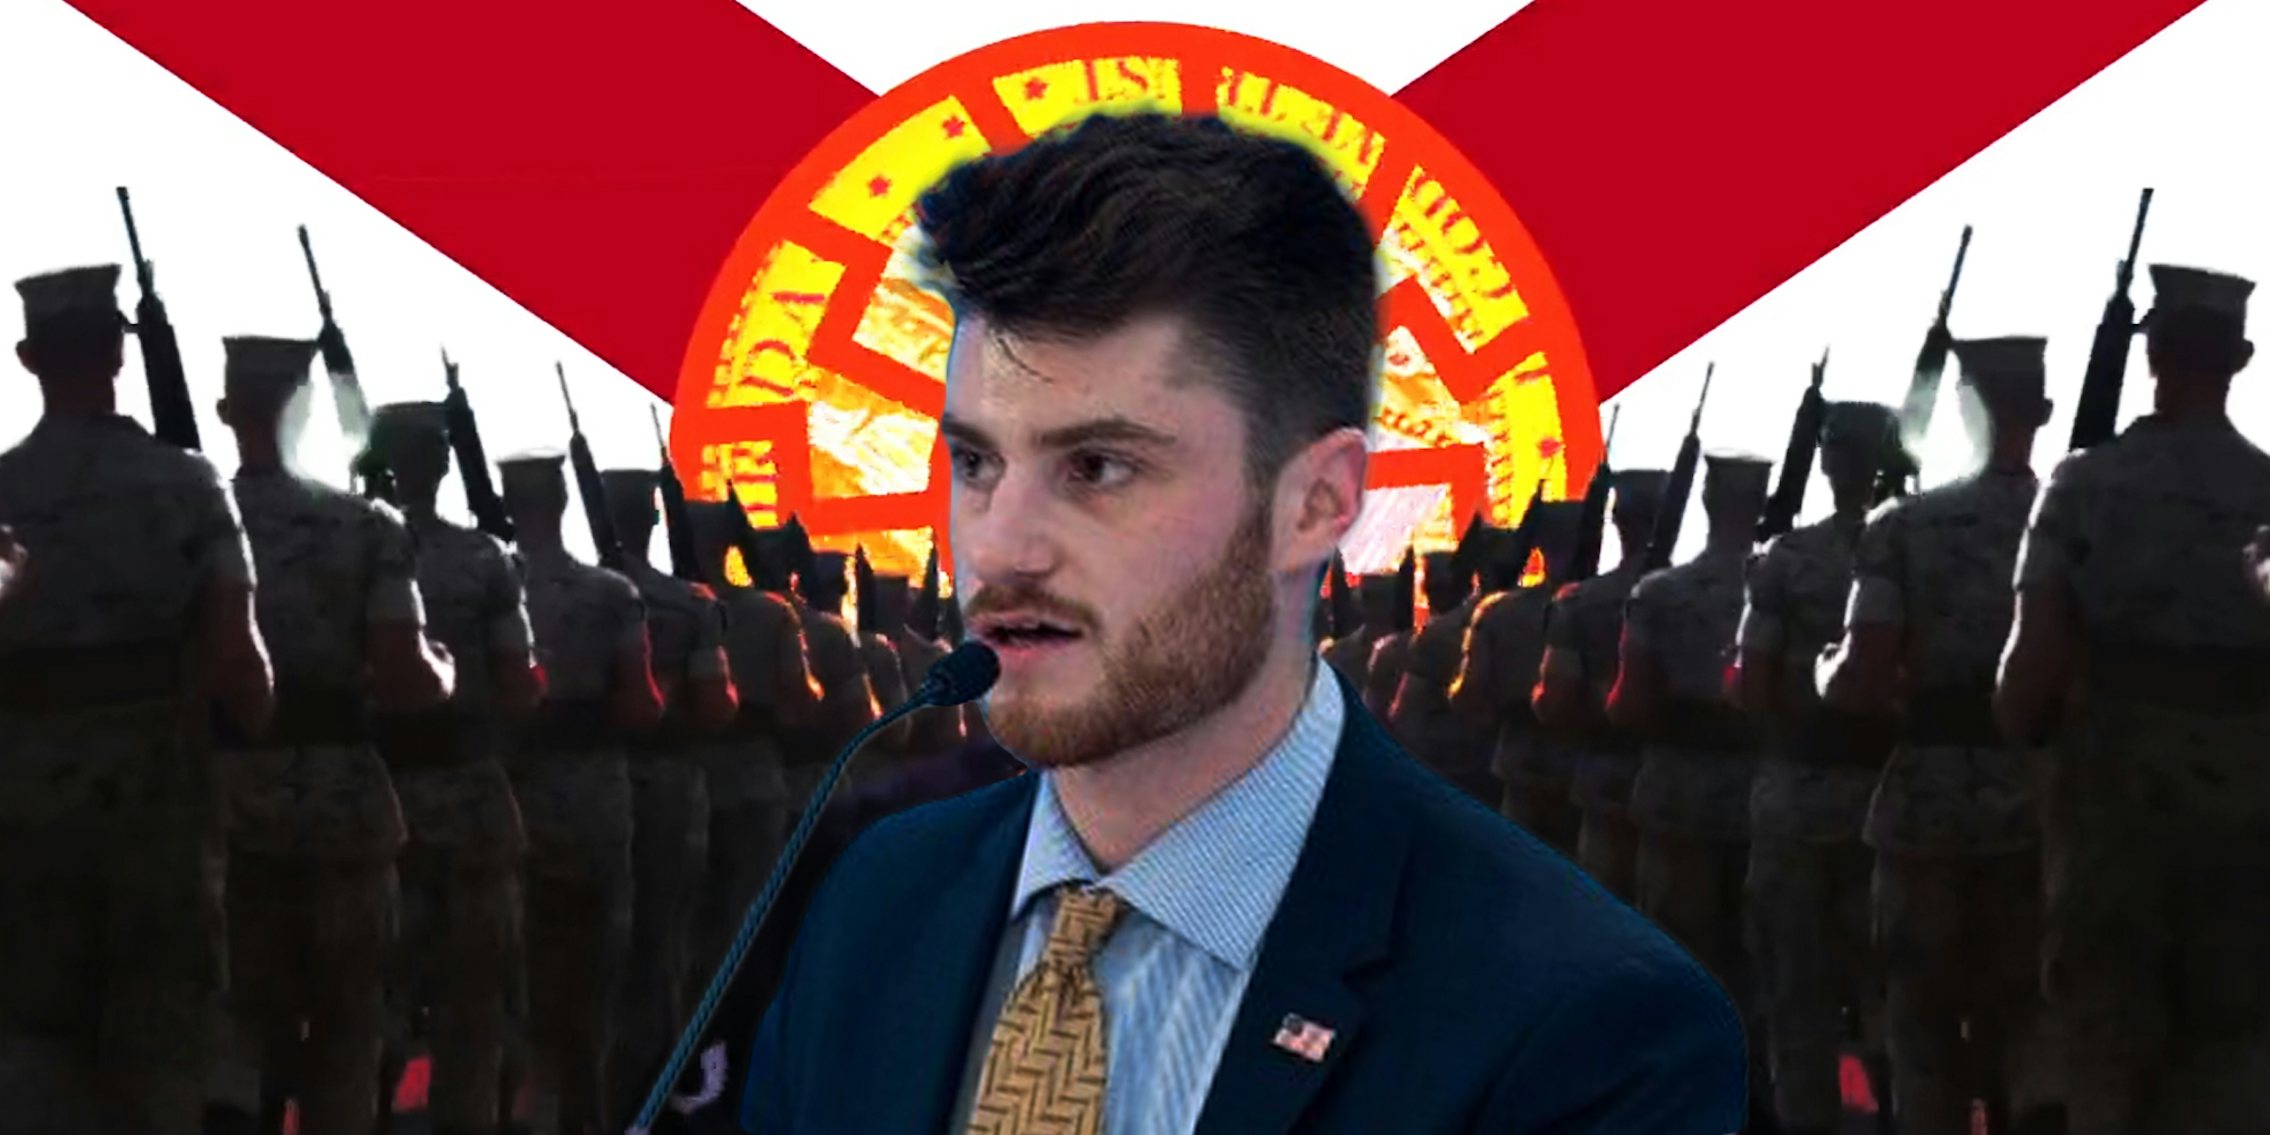 Nate Hochman in front of Nazi symbol red white and yellow background